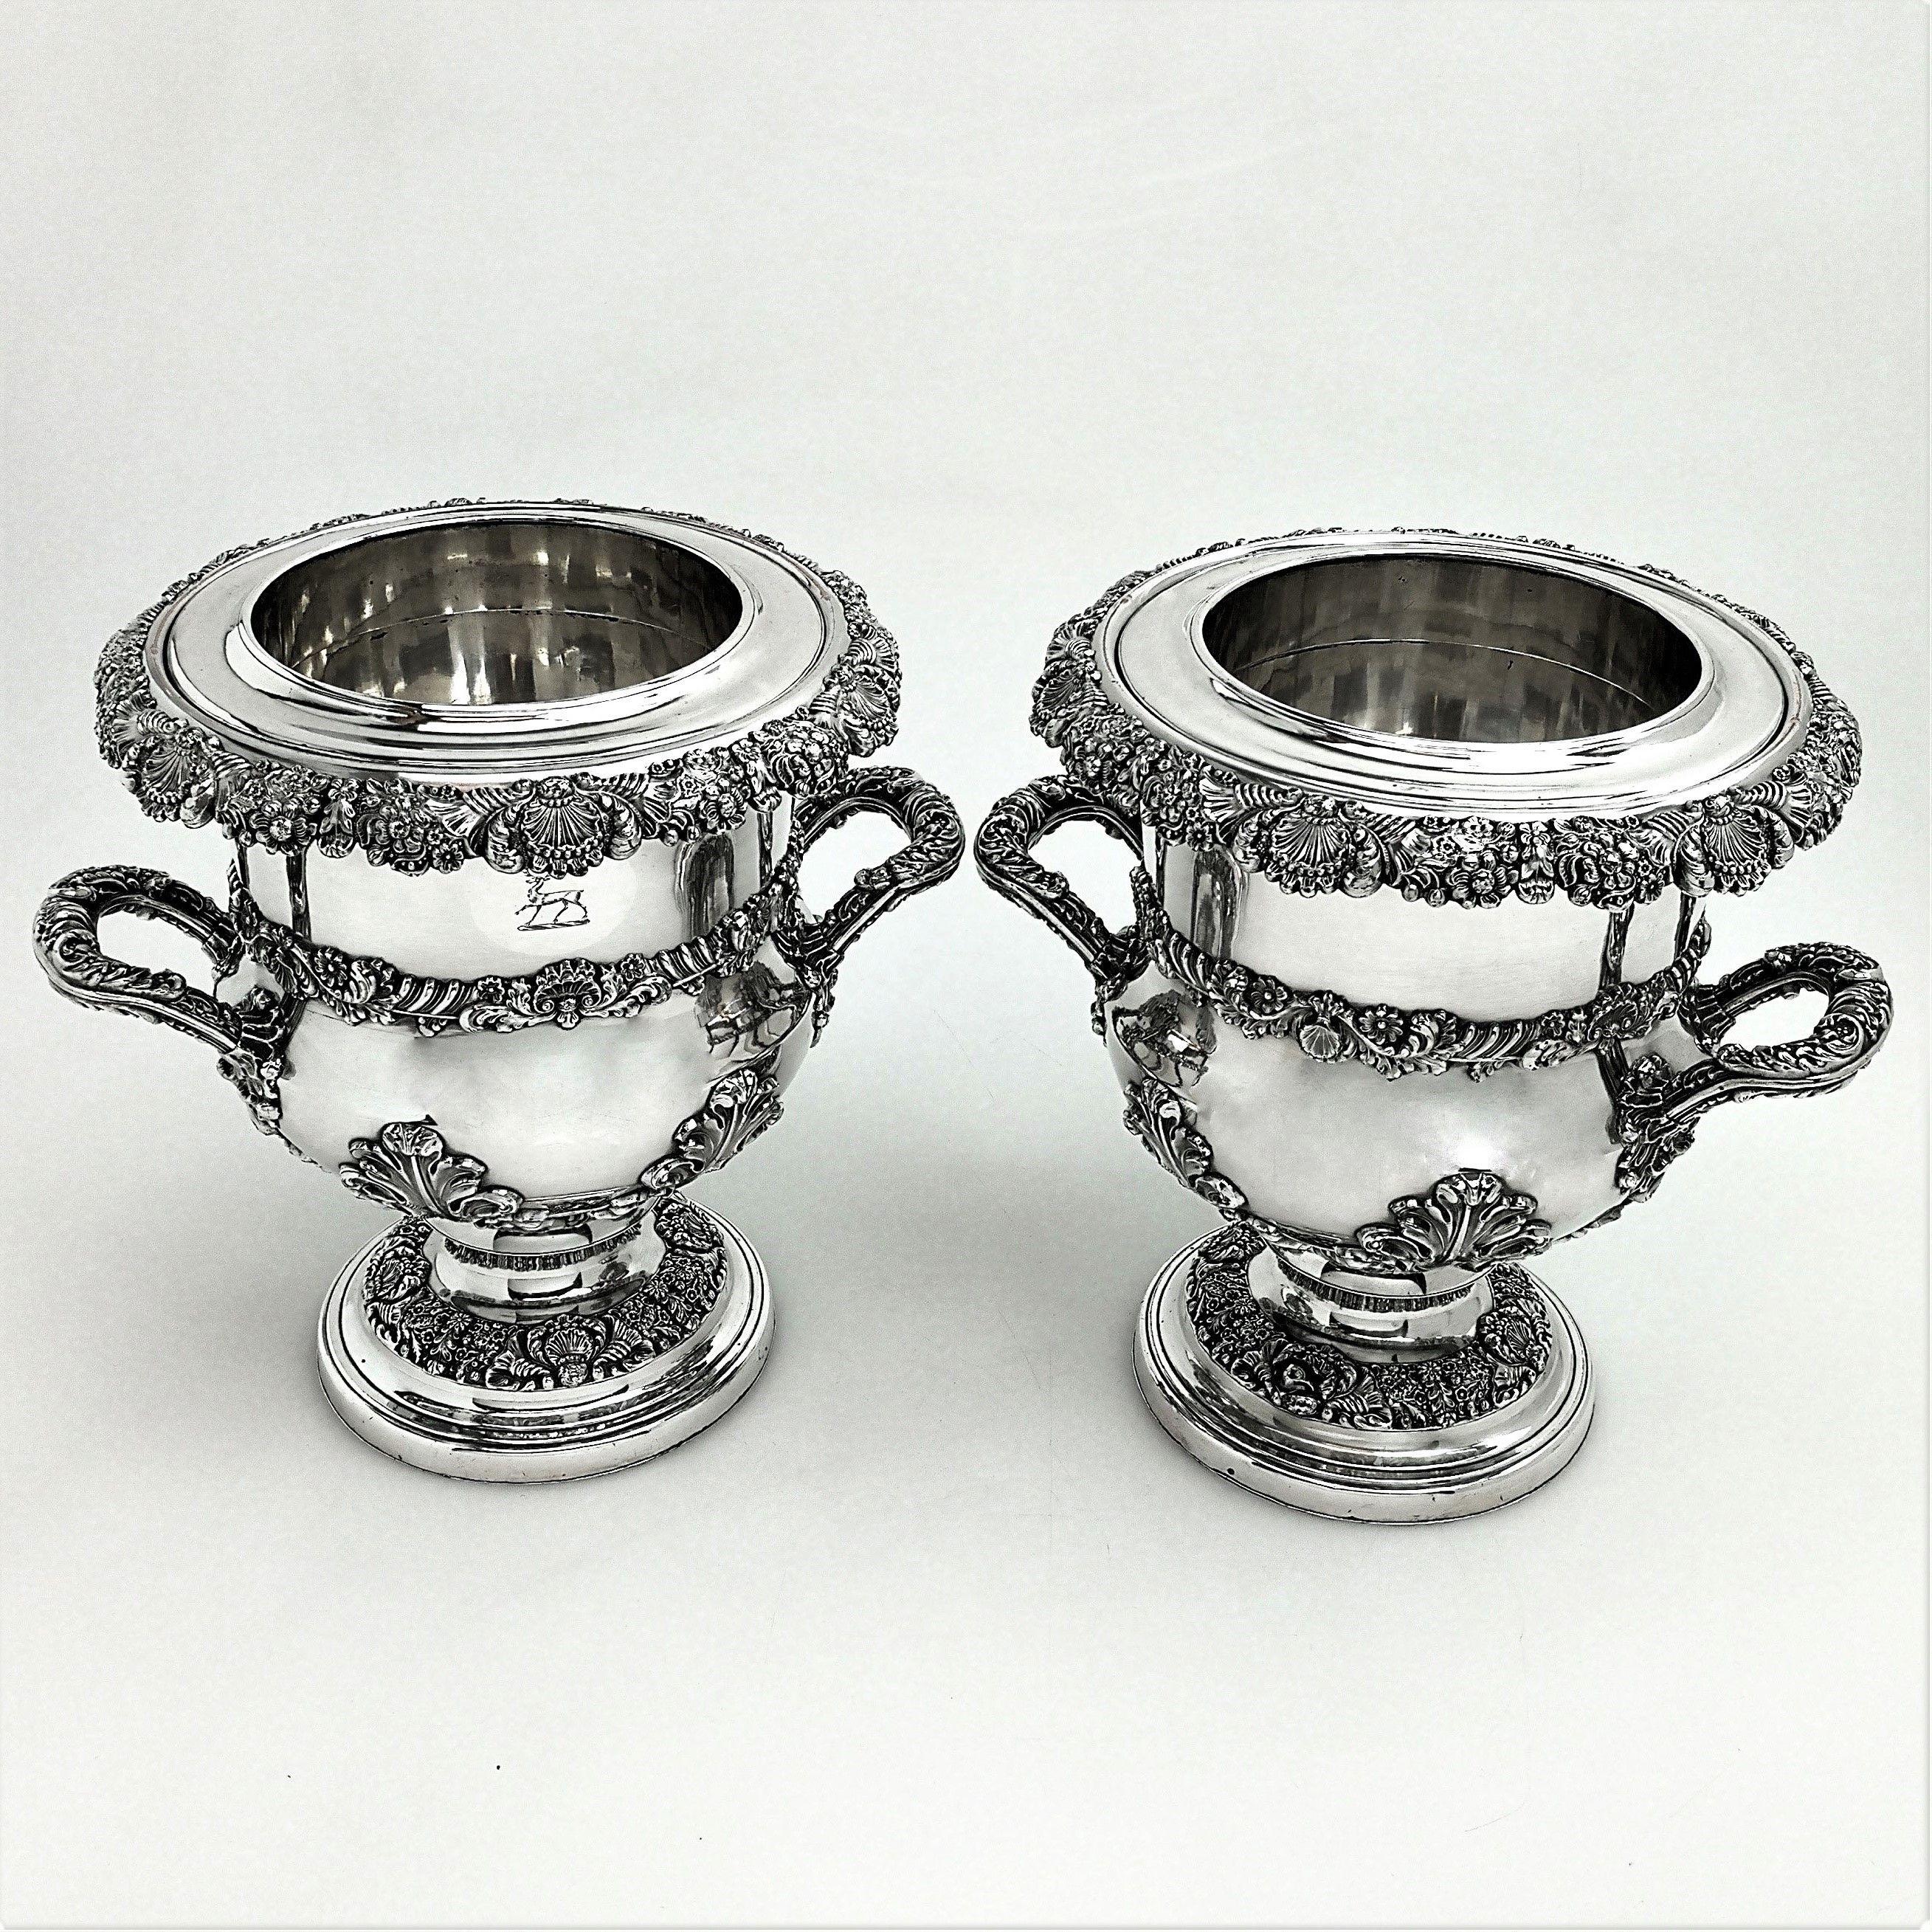 English Antique Georgian Old Sheffield Plate Wine Coolers c. 1825 Silver Plate  Pair